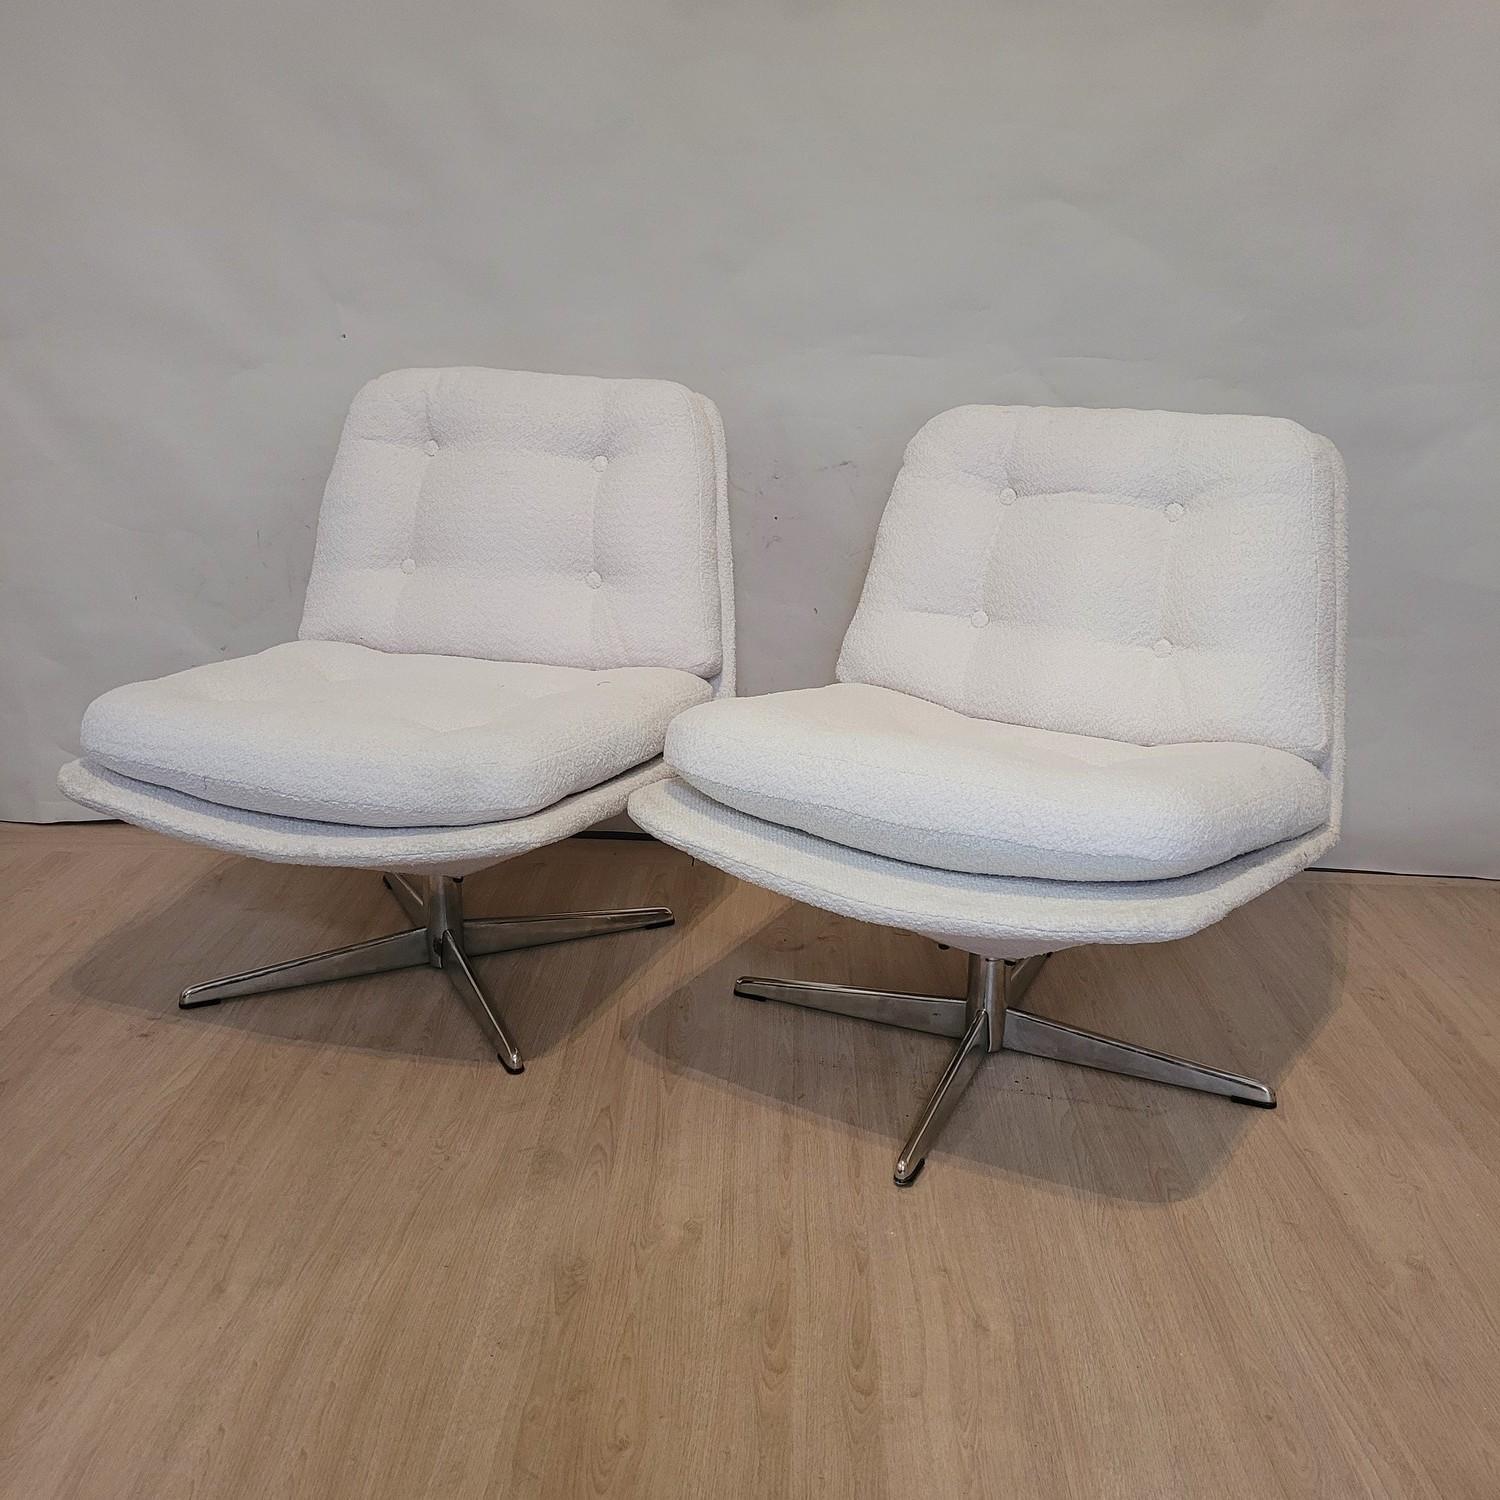 Pair Of Rotating Low Chairs, Bouclette Fabric, 20th Century For Sale 5